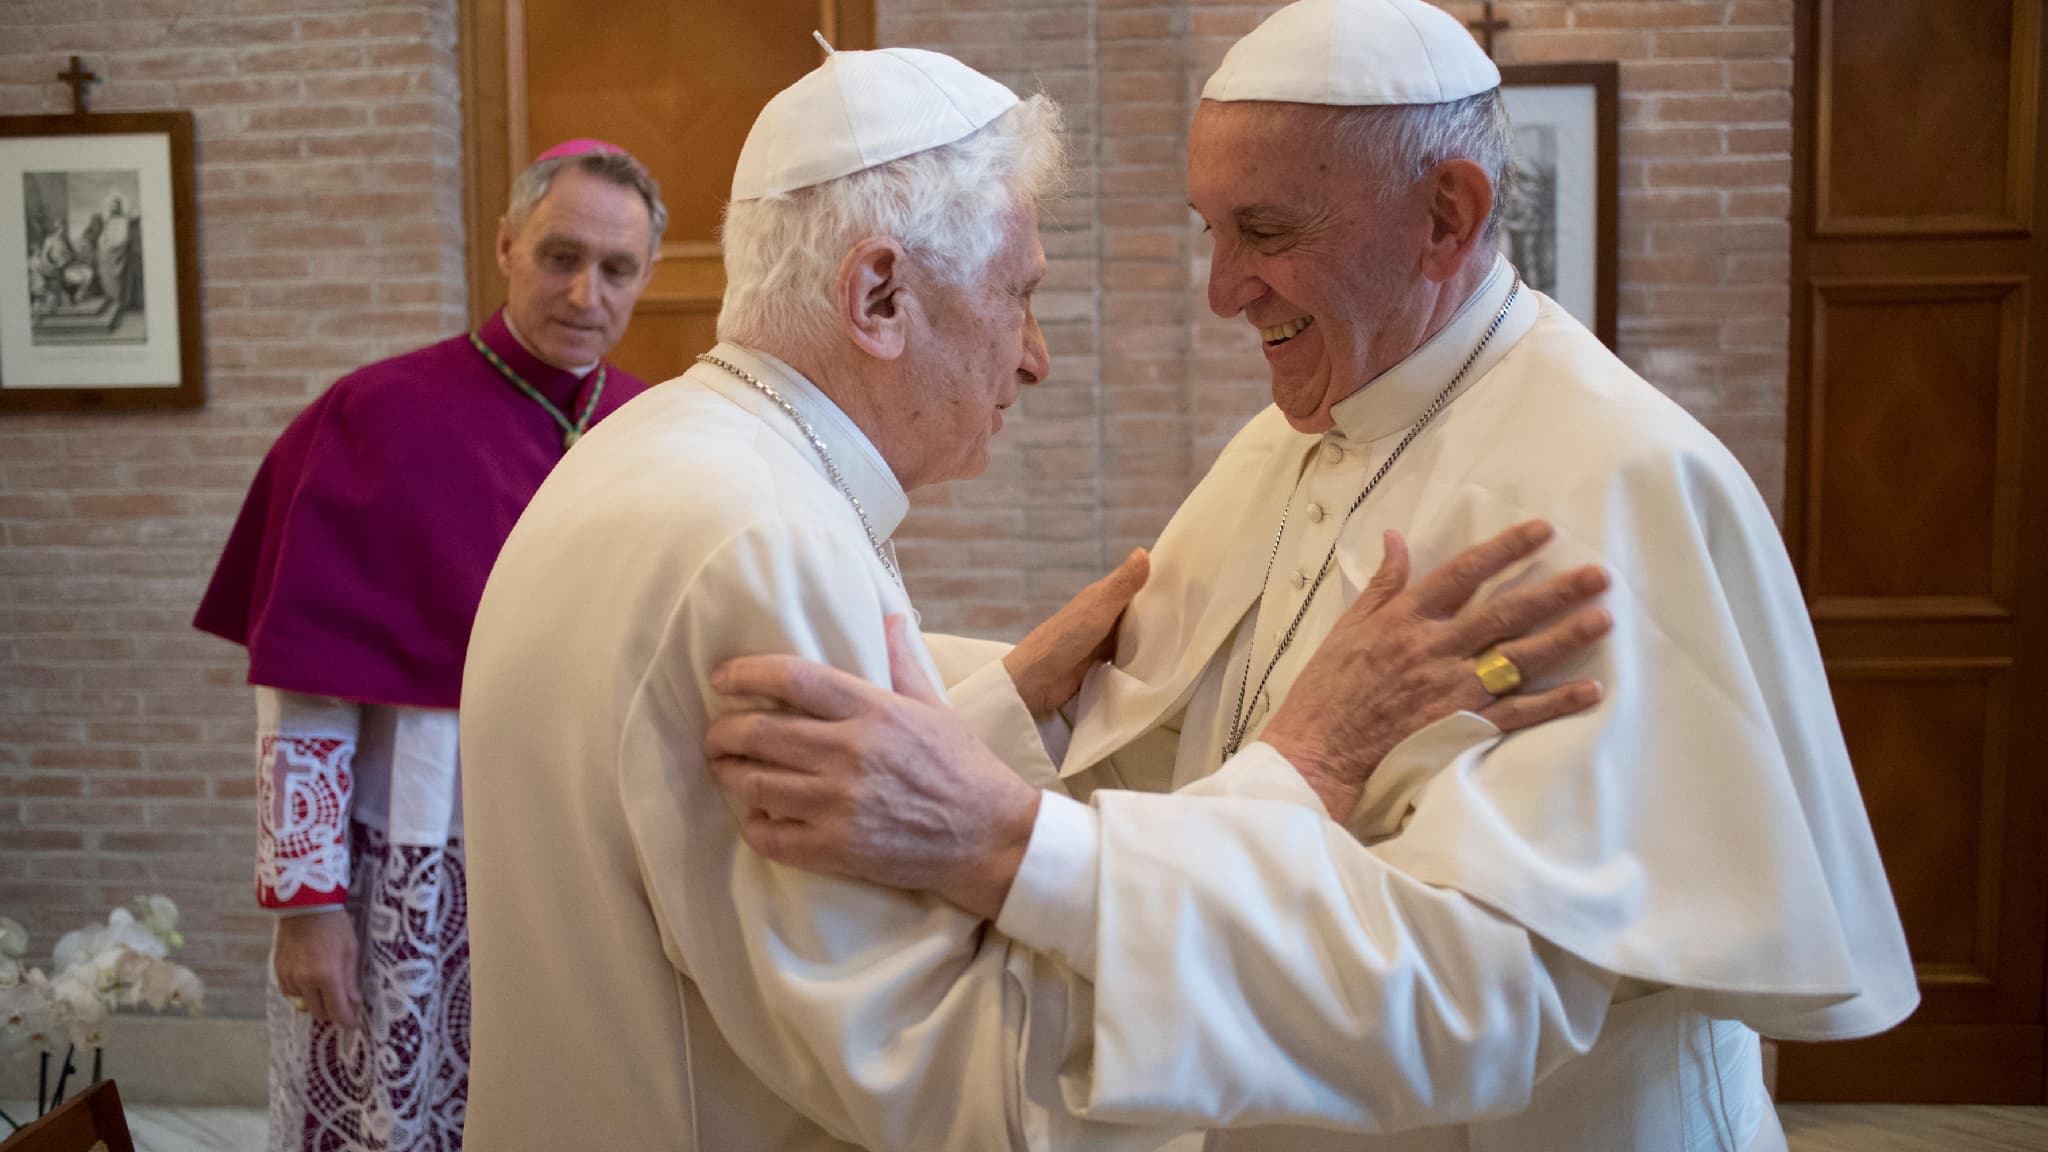 Pope Francis announces that his predecessor, Benedict XVI, is “gravely ill” and prays for him.